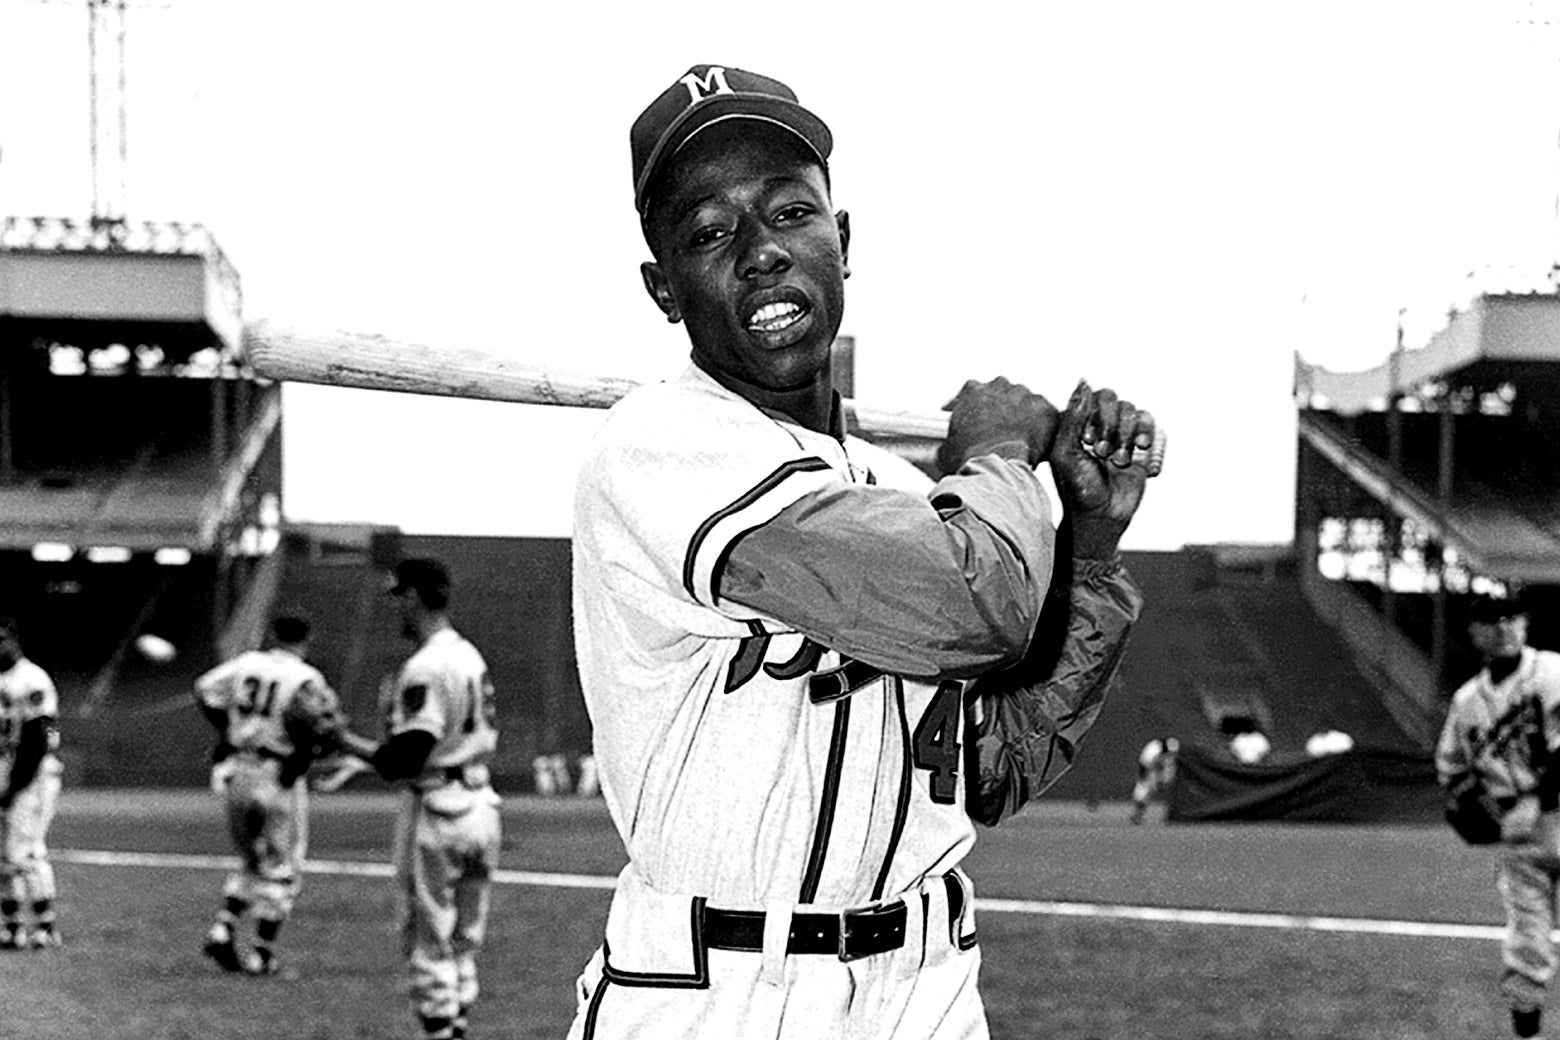 Aaron poses in his uniform, holding his bat over his left shoulder